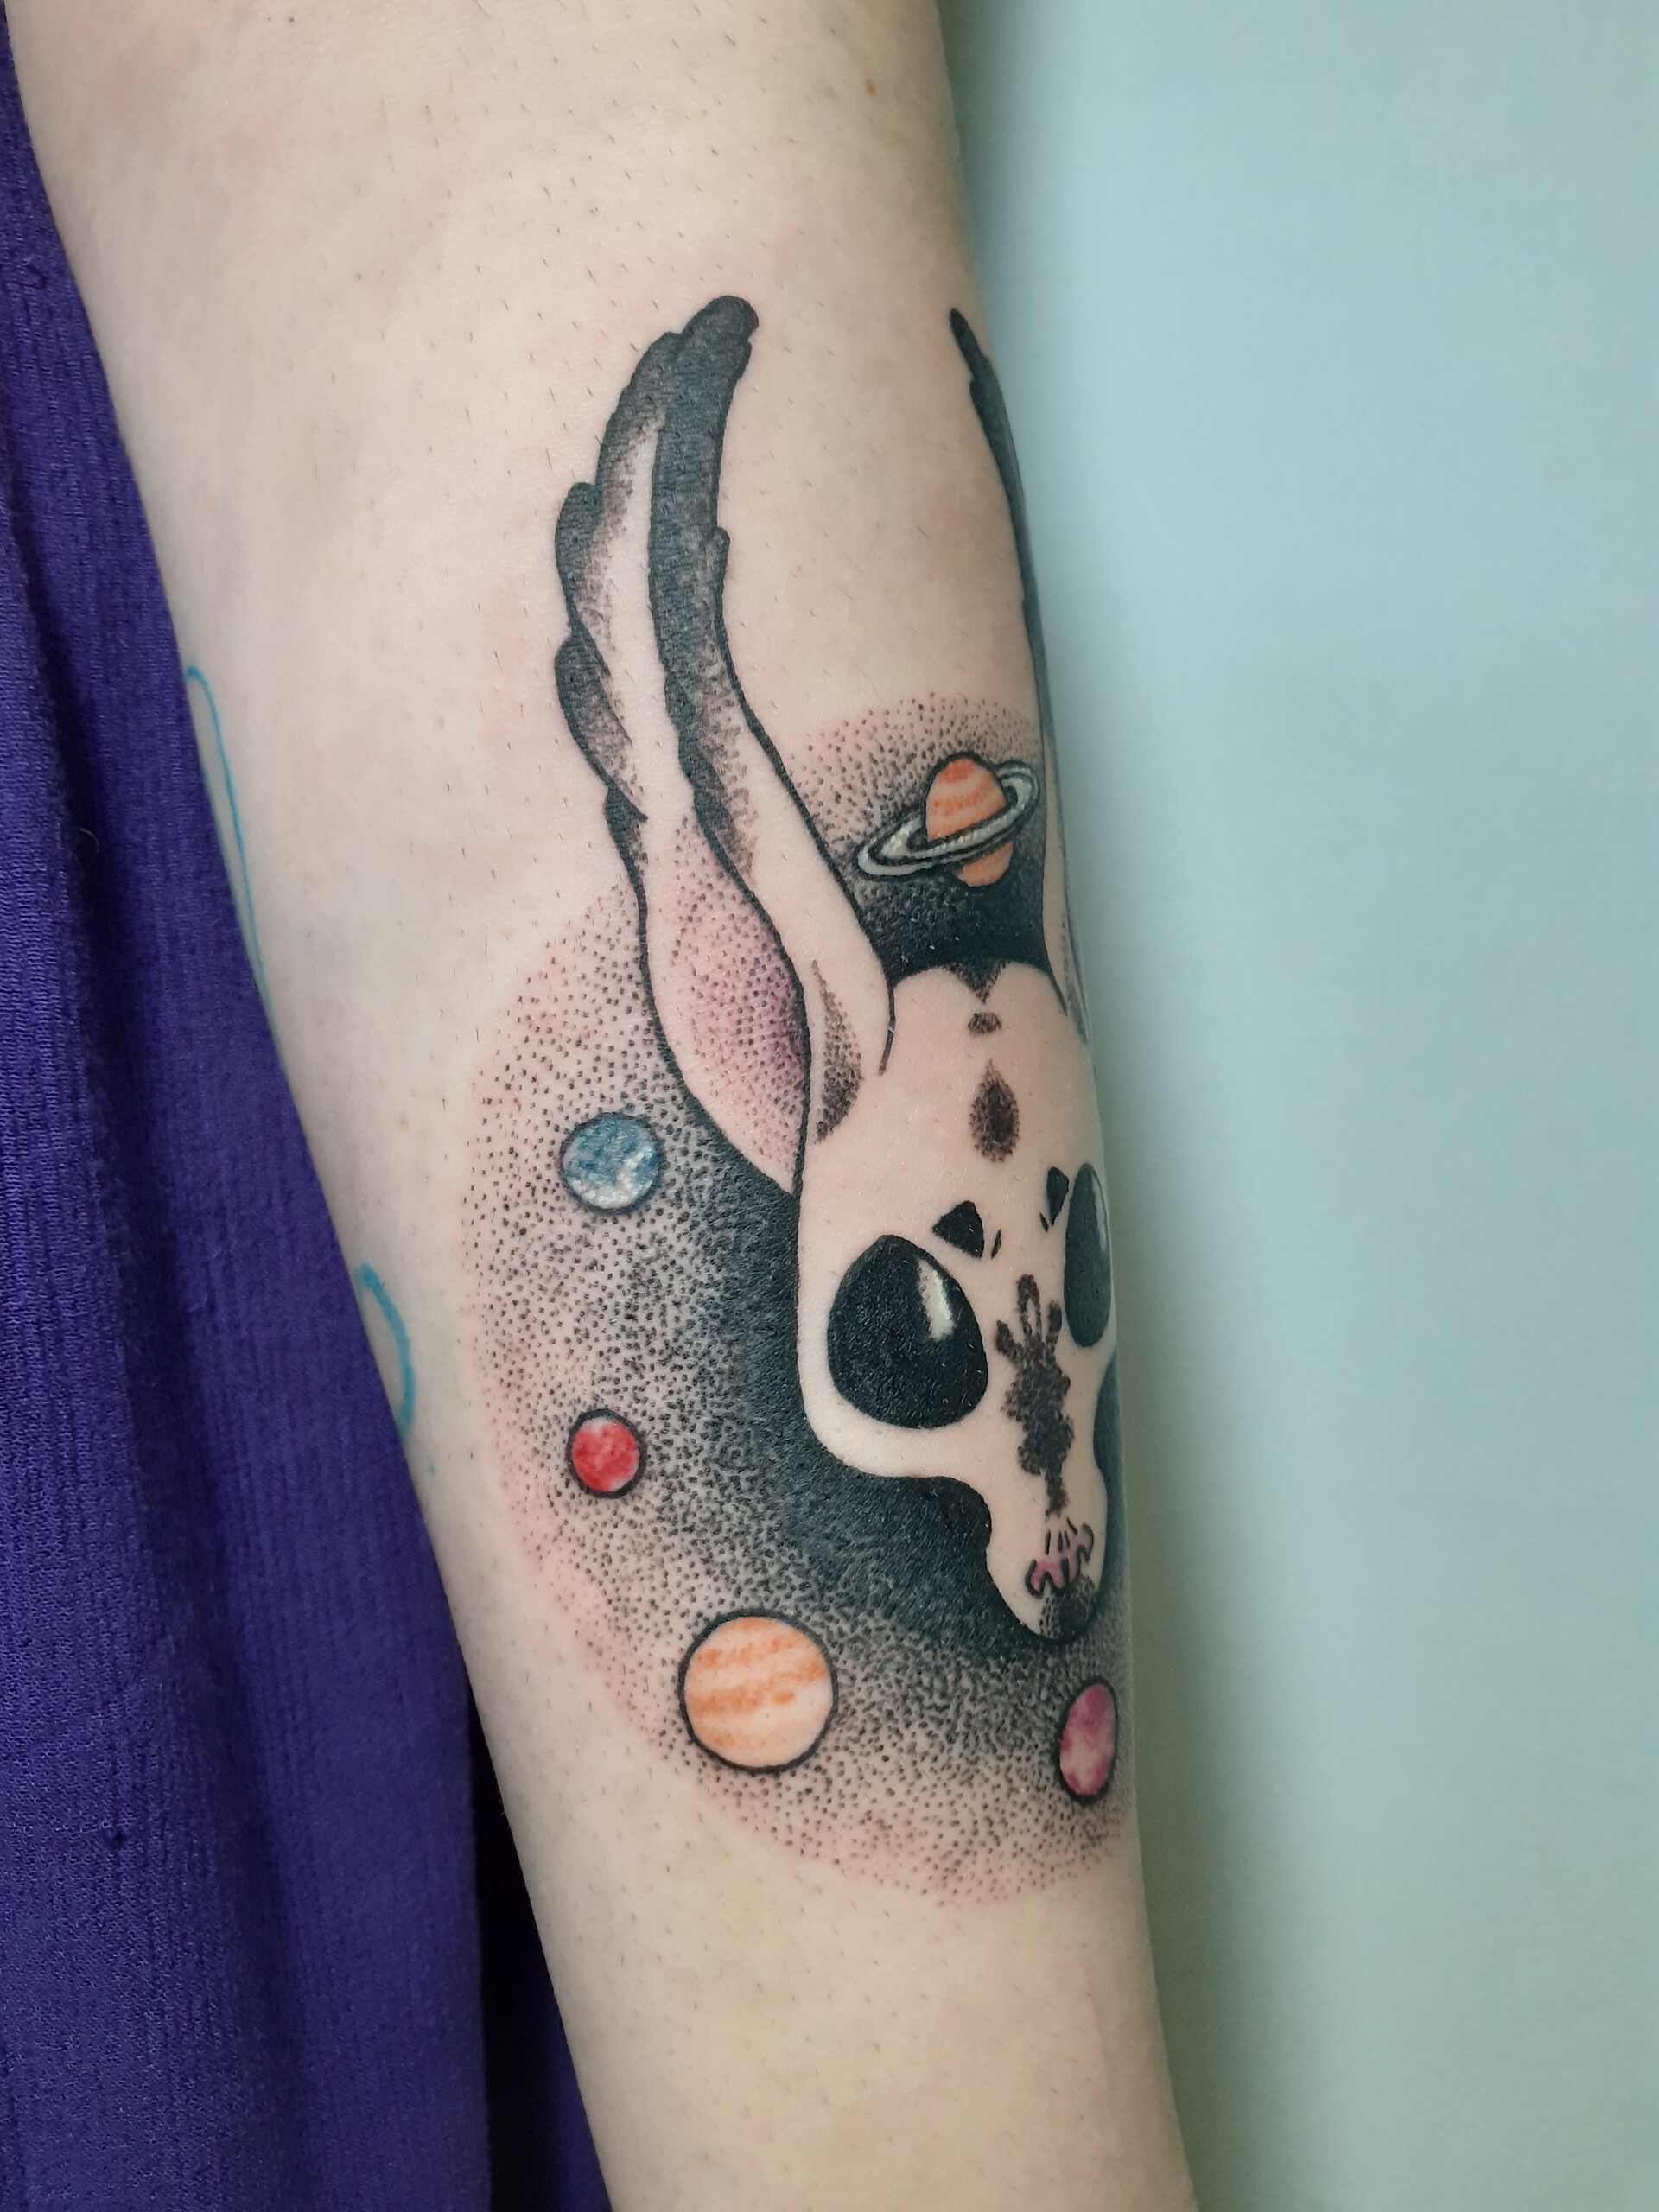 Fresh ink inspired by Watership Down Done by Tini Verini from No Regrets  London UK  rtattoos